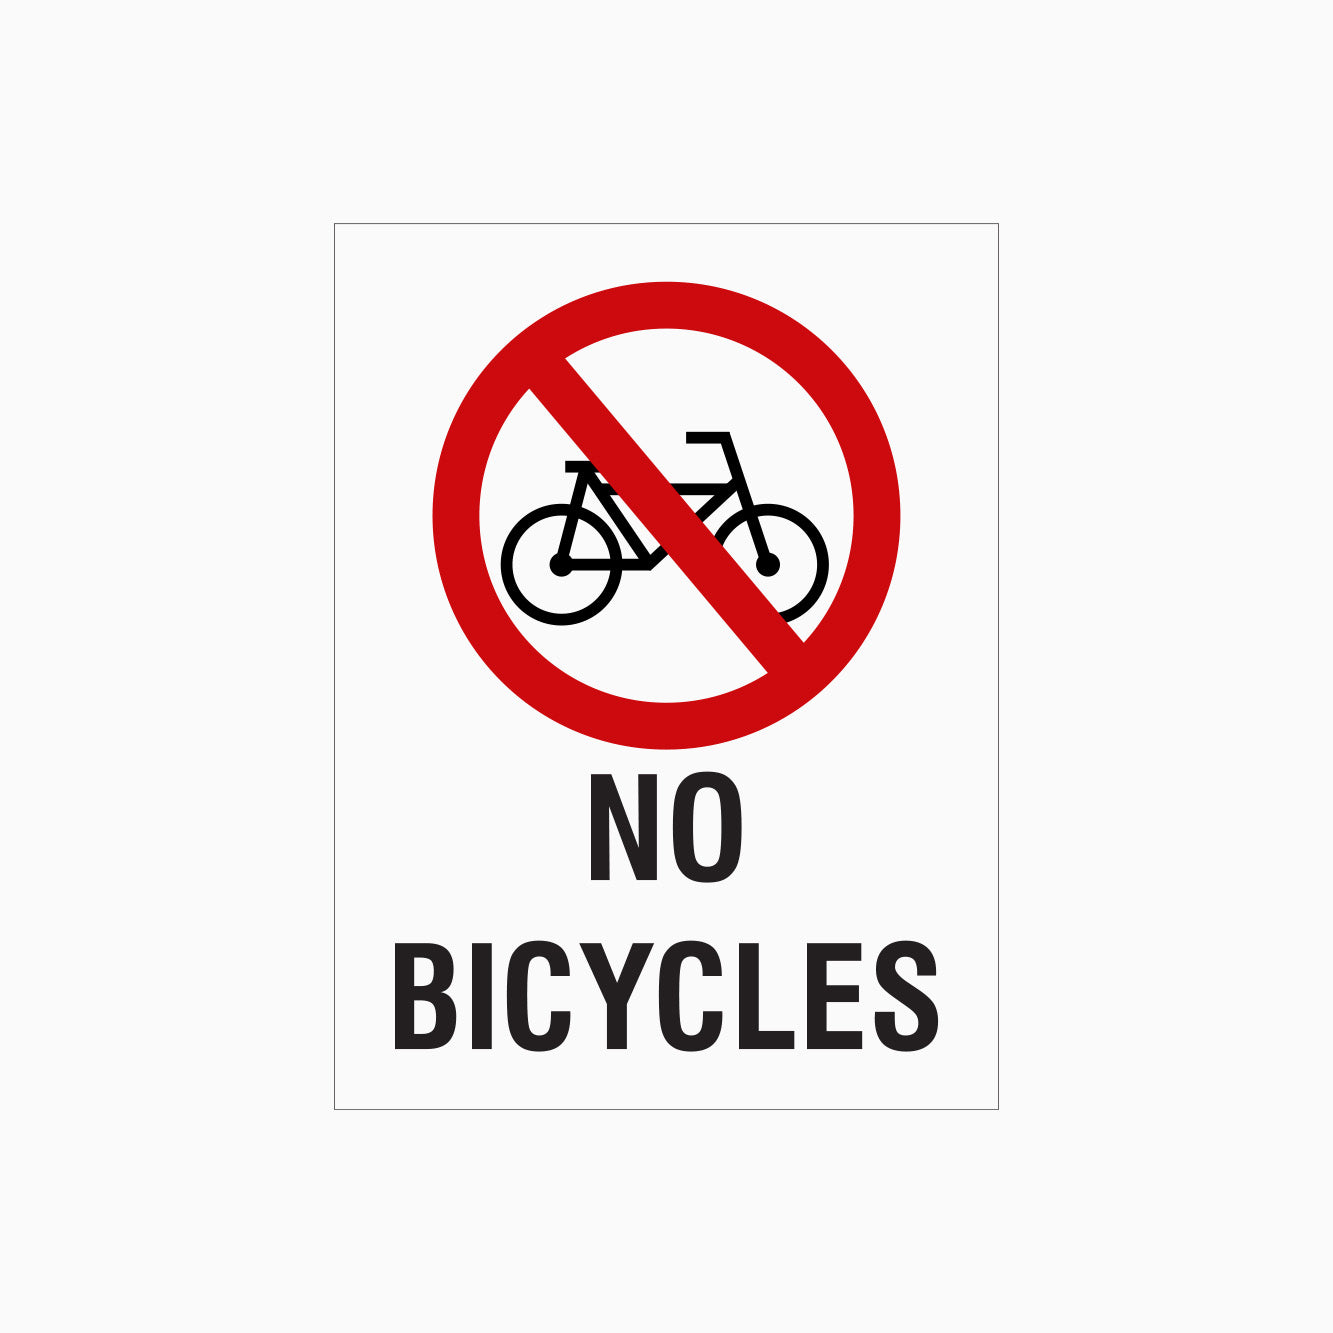 NO BICYCLES SIGN - PROHIBITION SIGNS - GET SIGNS